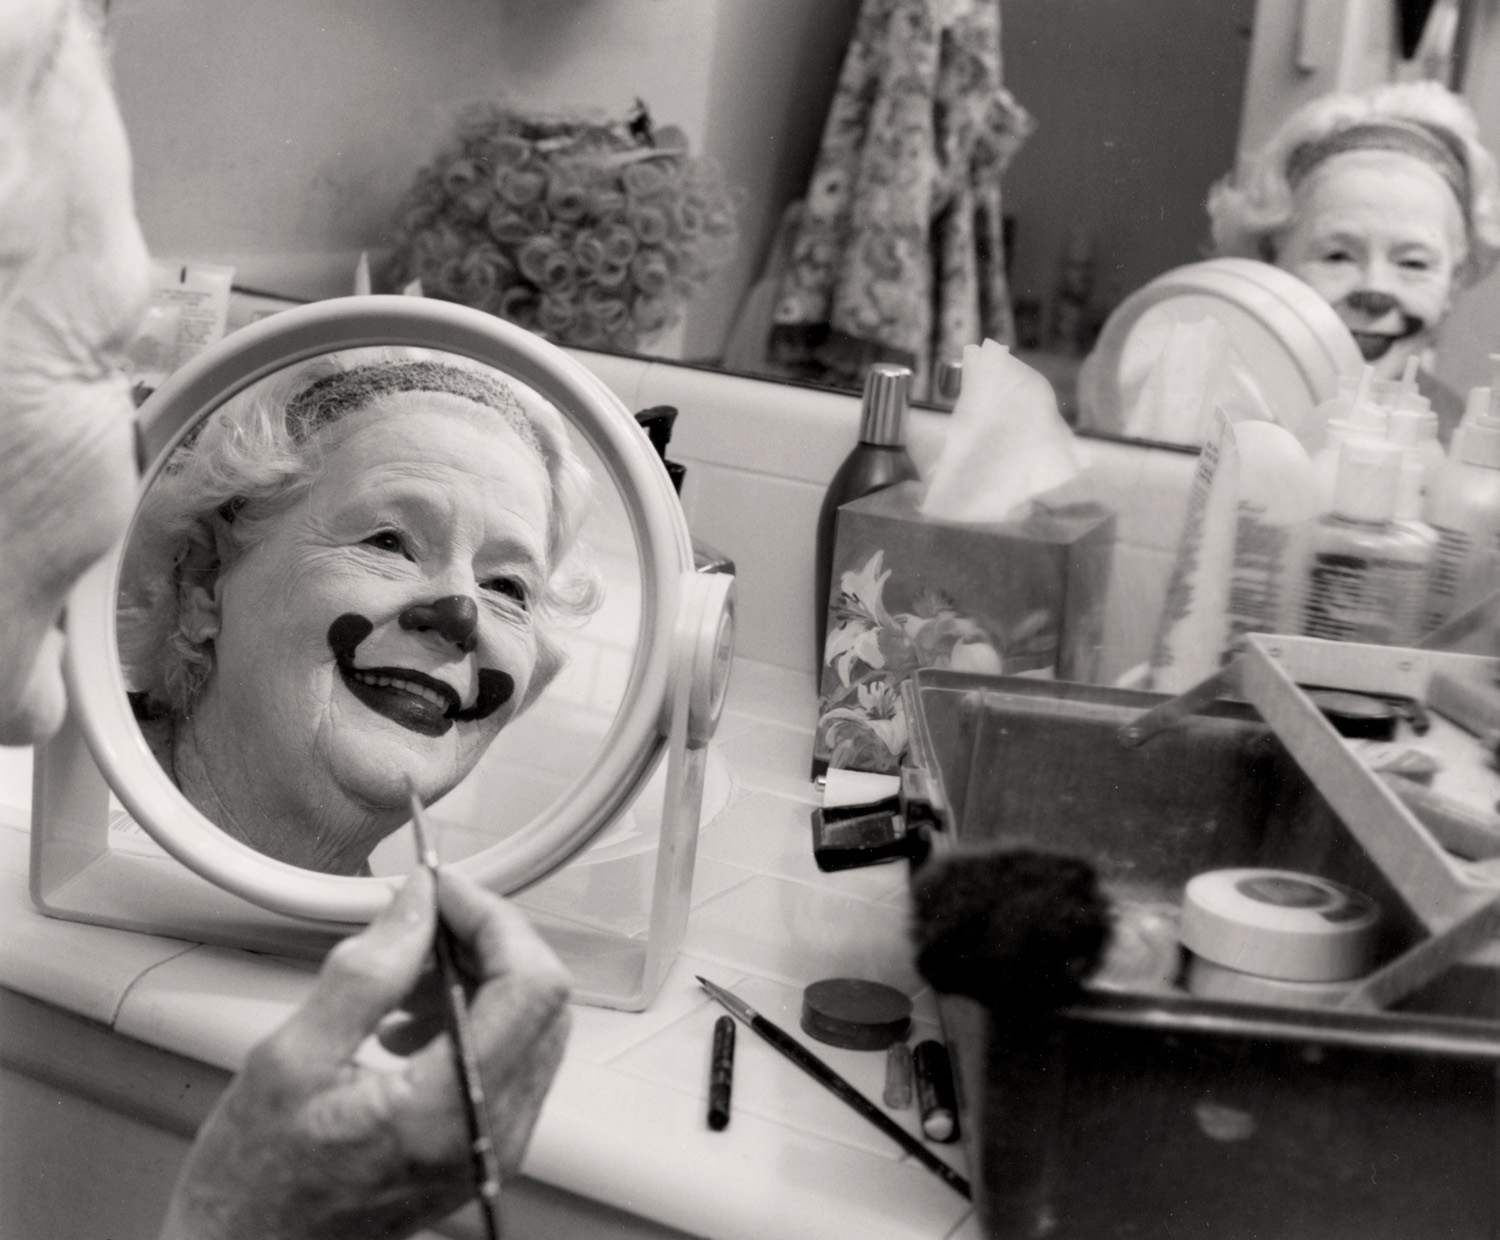  Lillian the Clown - from the series “Women of Courage” 